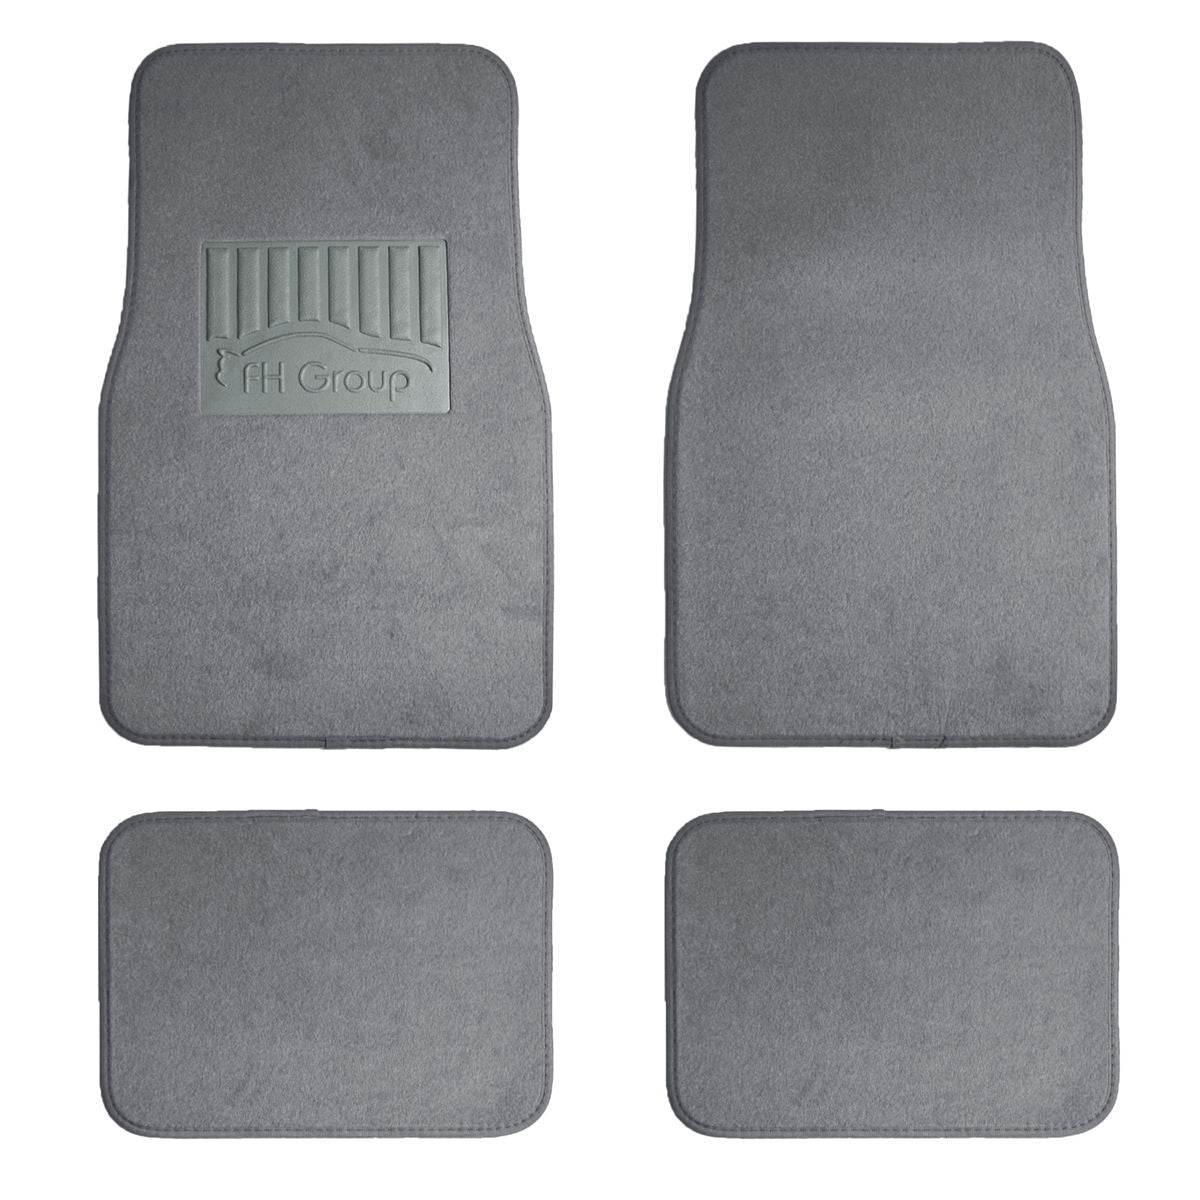  FH Group Automotive Floor Mats Solid ClimaProof for all weather  protection Universal Fit Trimmable Heavy Duty fits most Cars, SUVs, and  Trucks, 3pc Full Set Black : Everything Else